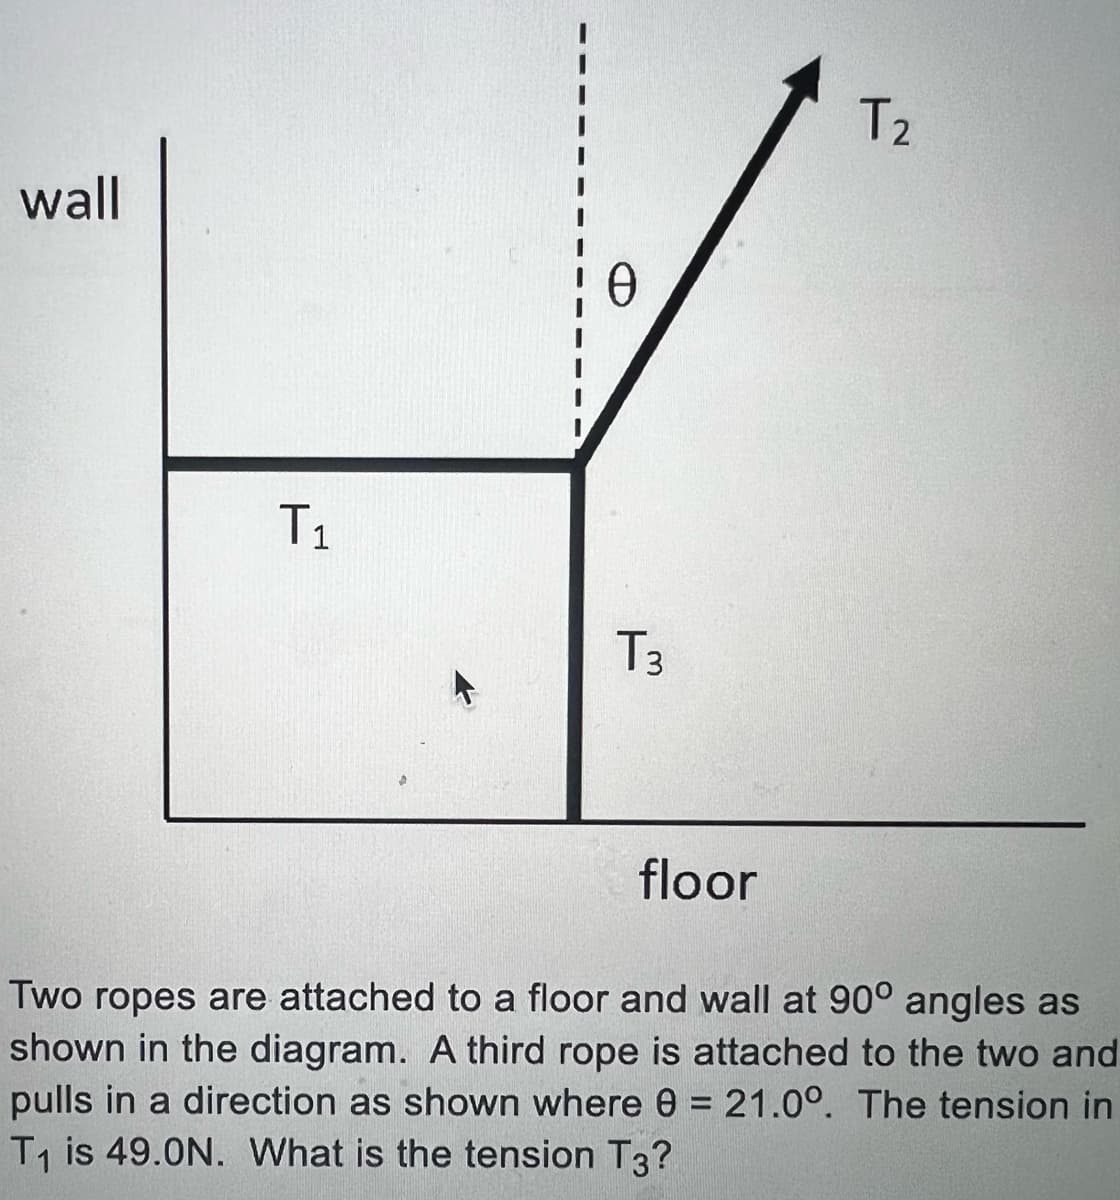 T2
wall
T1
T3
floor
Two ropes are attached to a floor and wall at 90° angles as
shown in the diagram. A third rope is attached to the two and
pulls in a direction as shown where 0 = 21.0°. The tension in
T is 49.0N. What is the tension T3?
